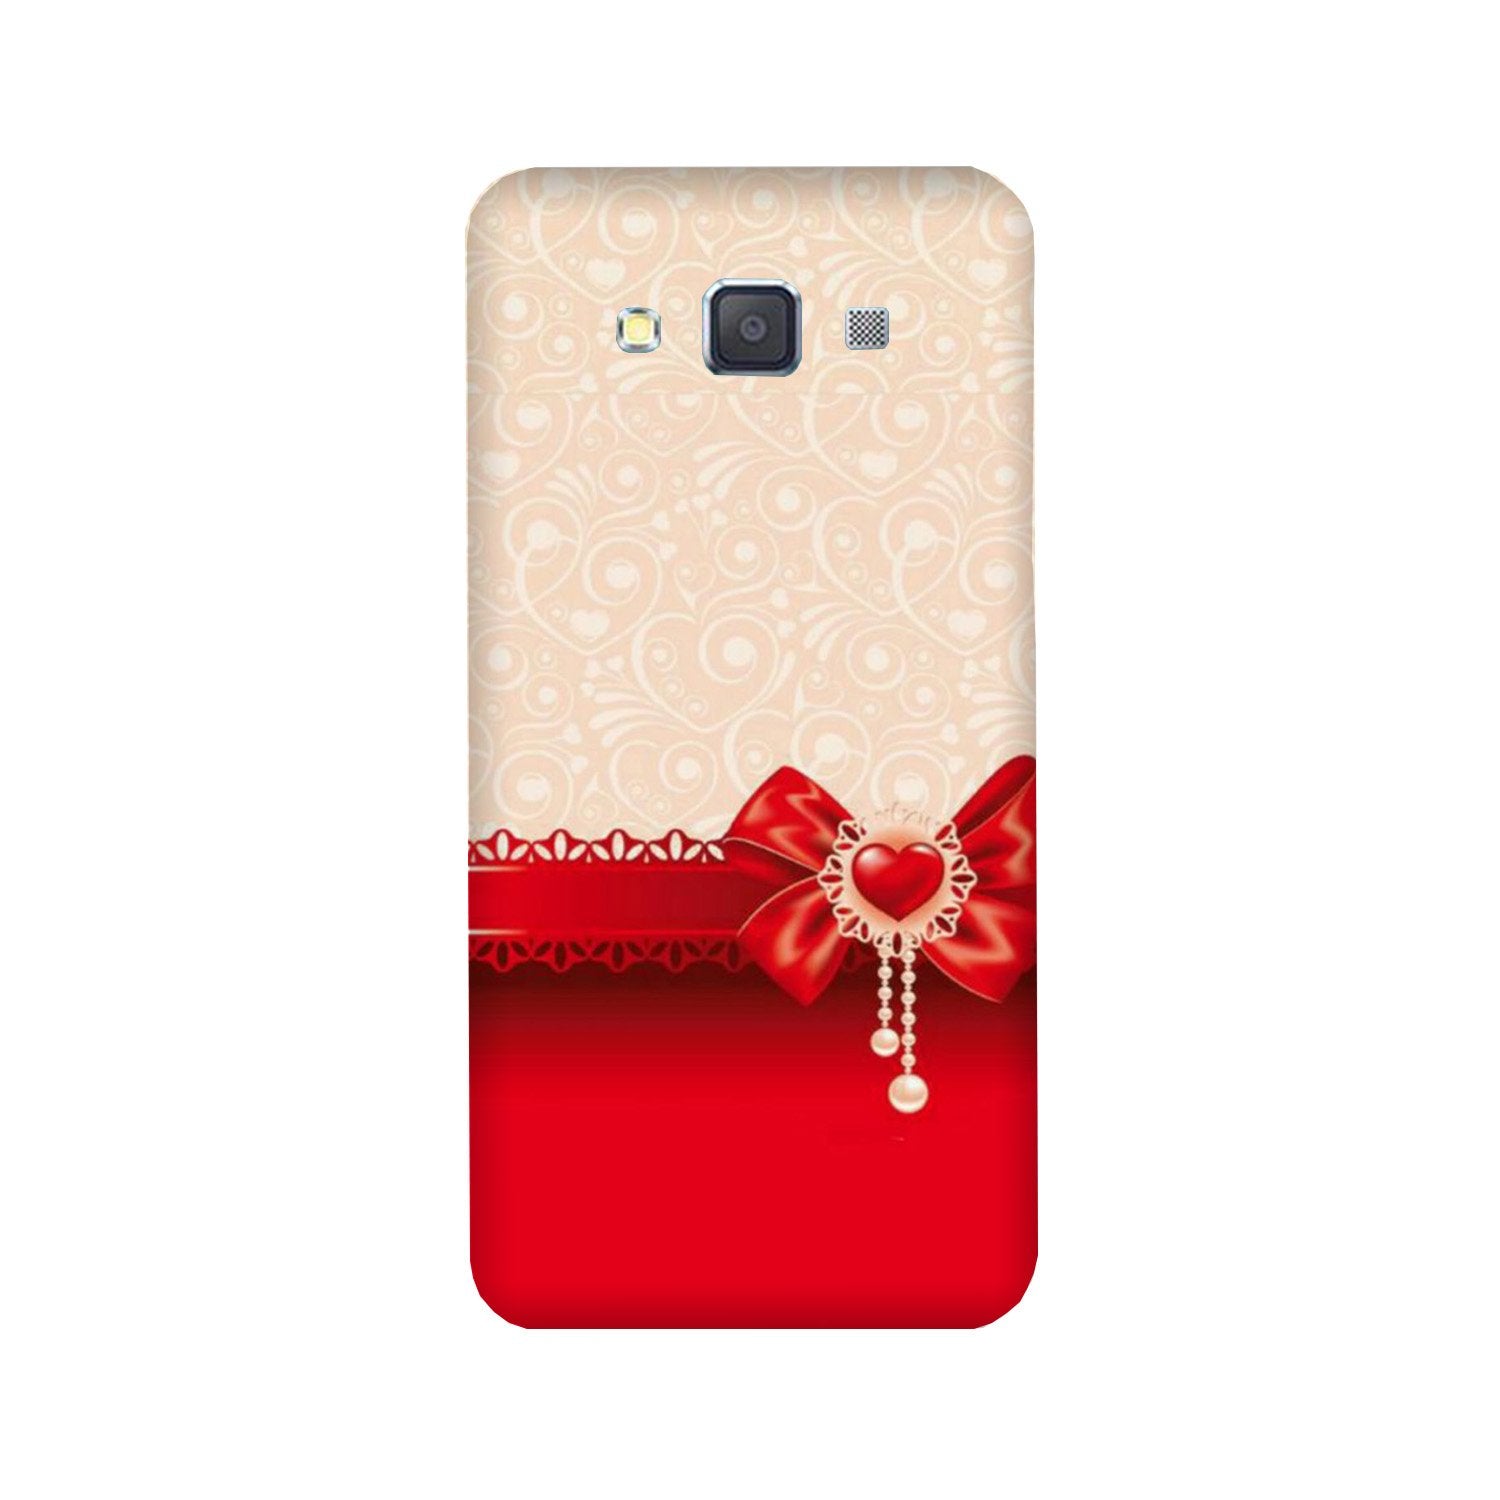 Gift Wrap3 Case for Galaxy A8 (2015)